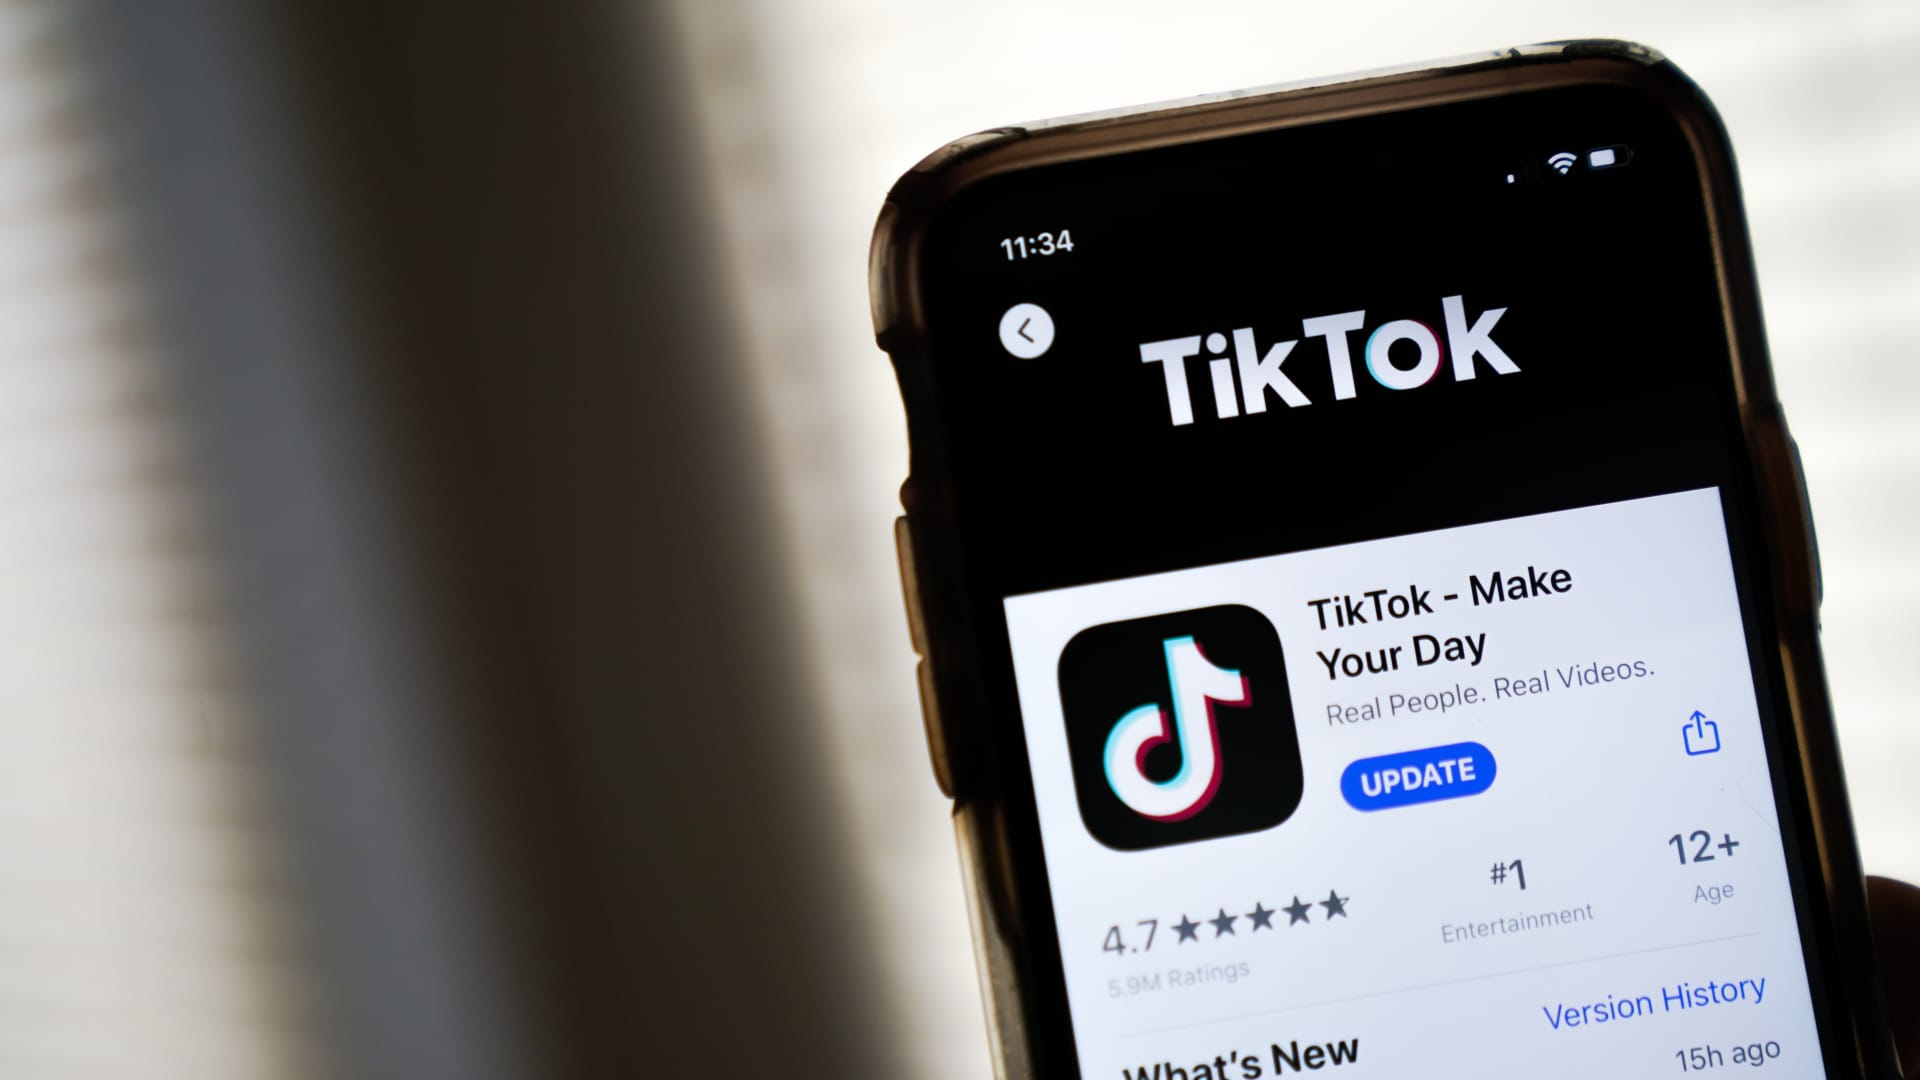 FCC commissioner asks Apple, Google to remove TikTok from app stores